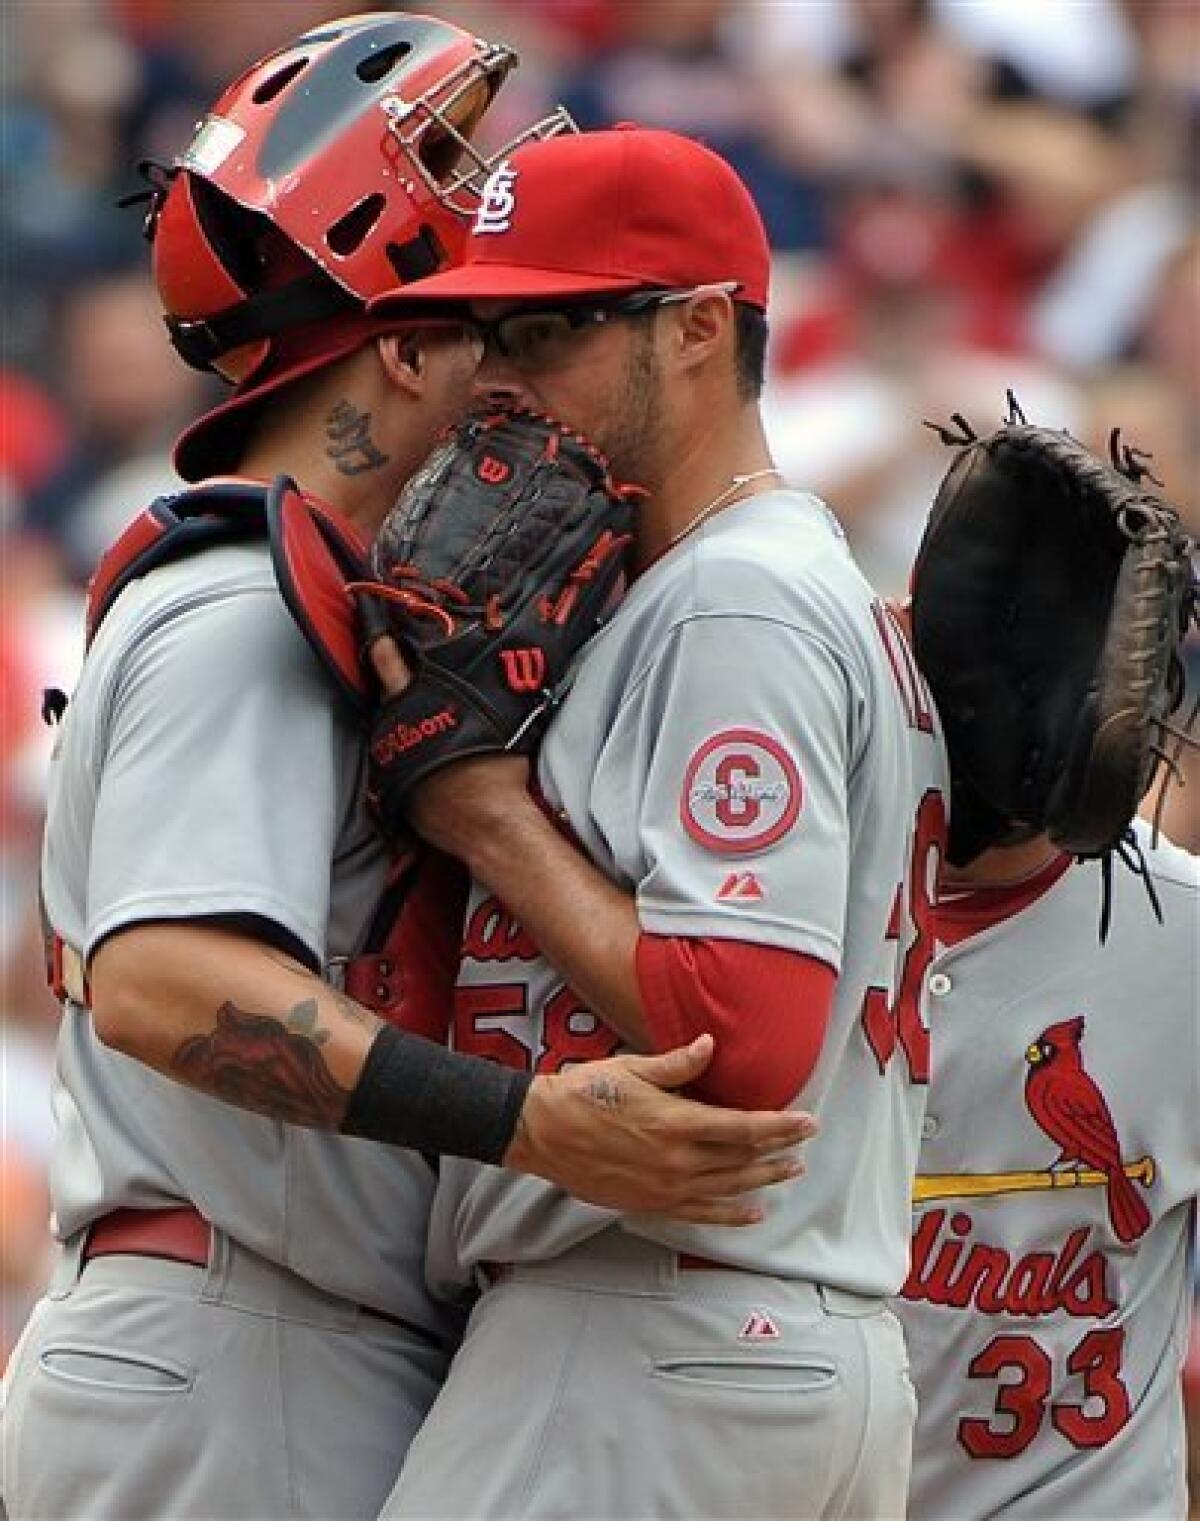 MOLINA 'FEELS THE GAME